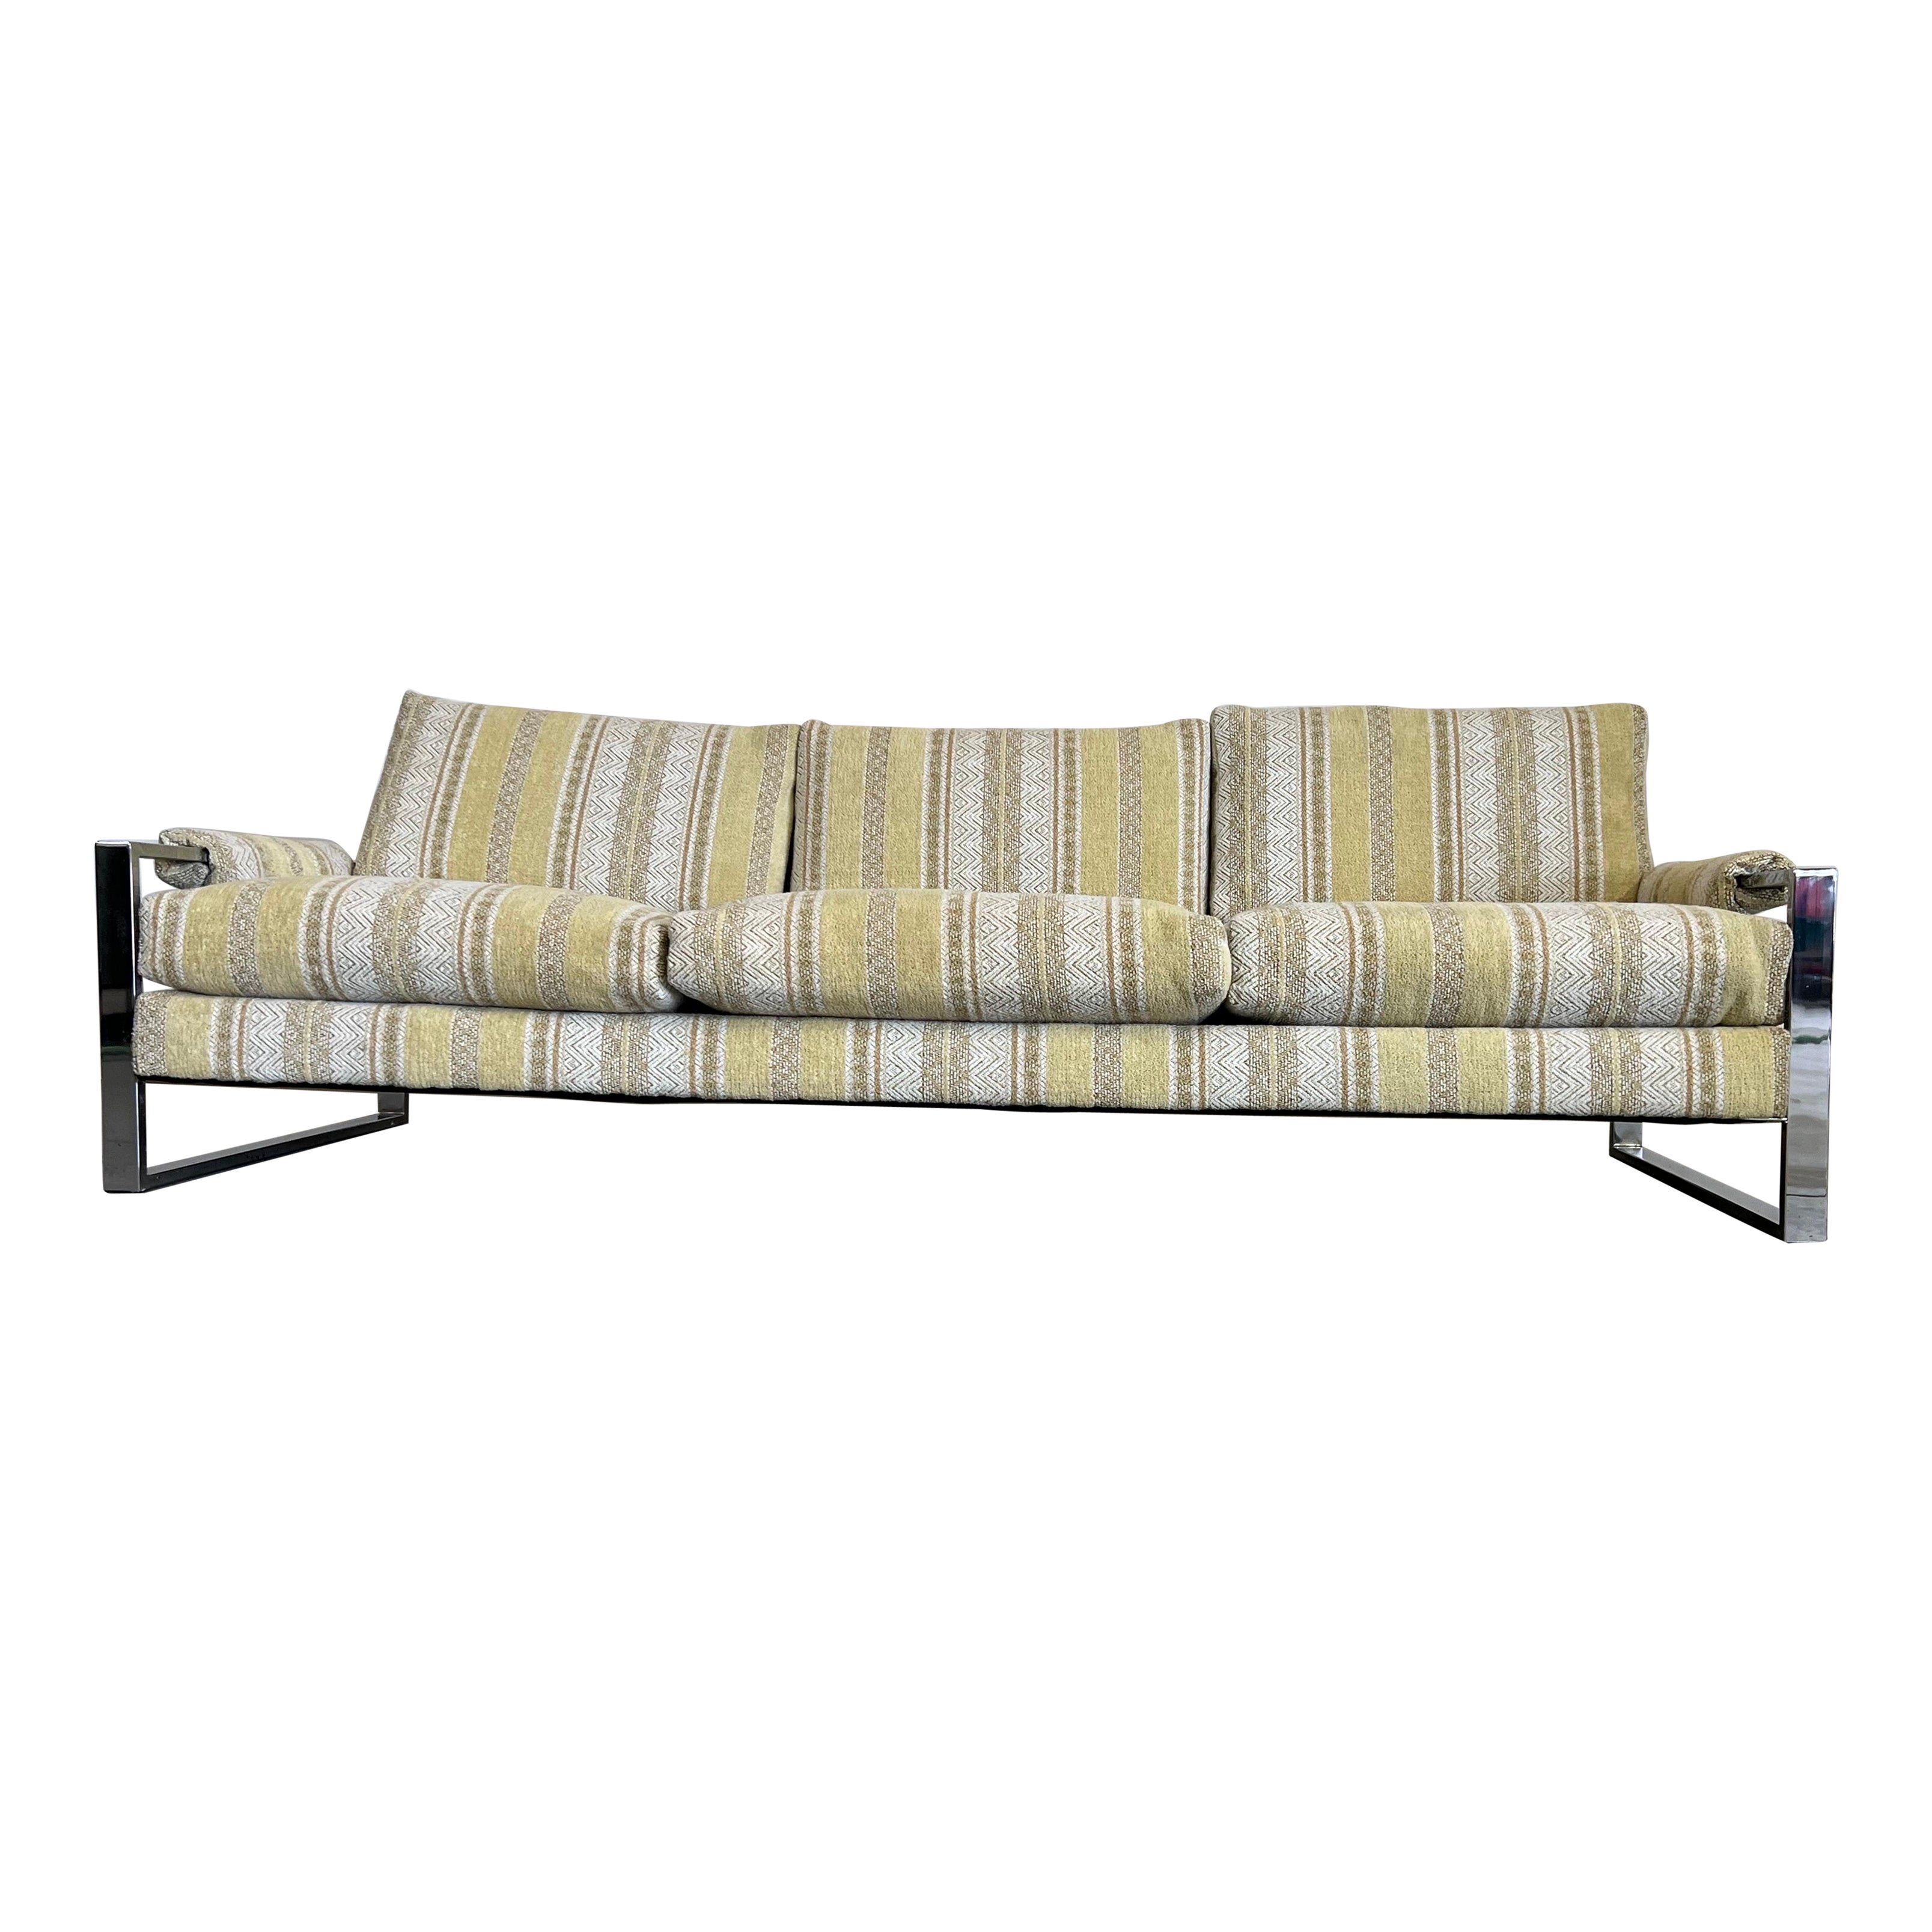 Mid-Century Danish Modern Adrian Pearsall chrome Craft Associates sofa.

Offered is a gorgeous vintage Mid-Century Modern sofa, By Craft Associates- Adrian Pearsall. The sofa captures all the design elemnets of the 1960-170s era, Long and Low.